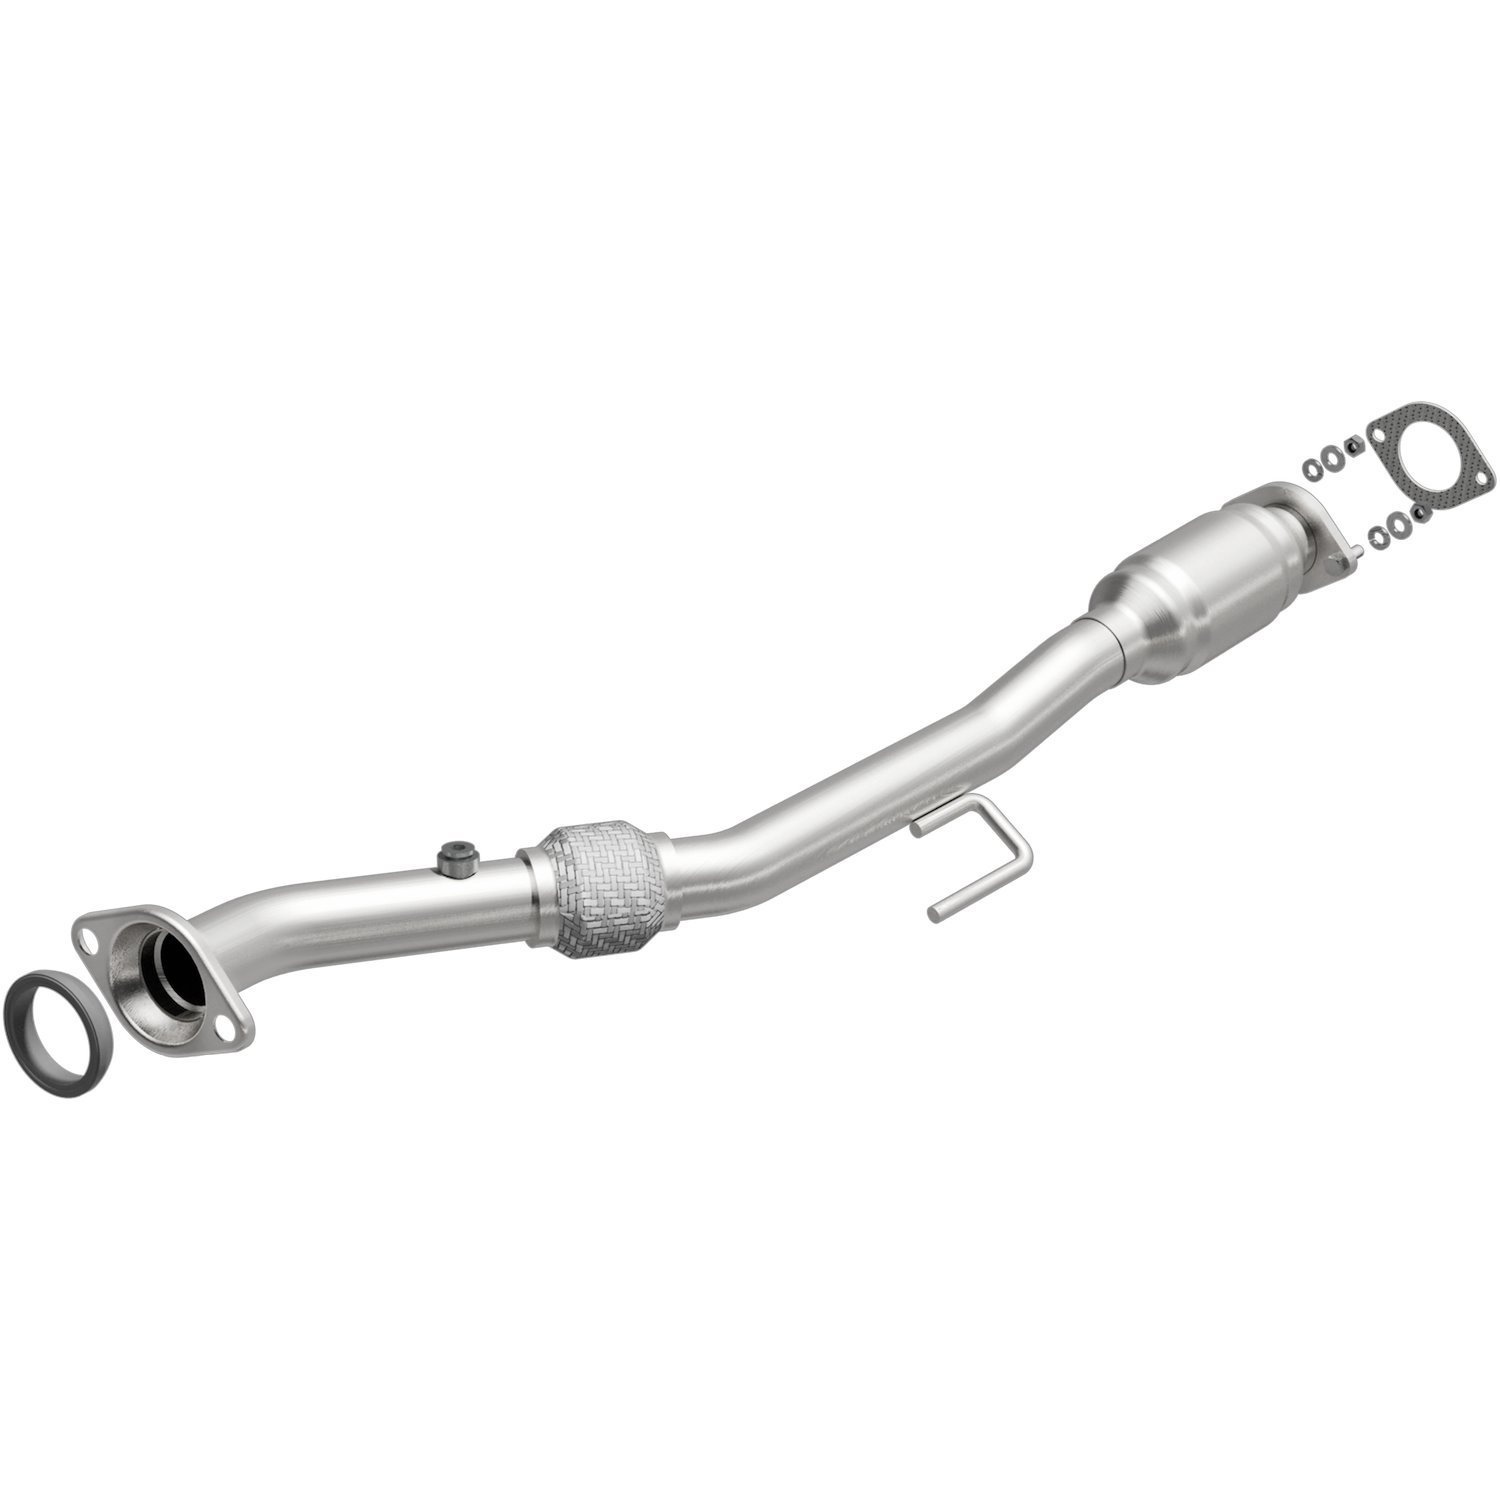 2002-2006 Nissan Altima OEM Grade Federal / EPA Compliant Direct-Fit Catalytic Converter